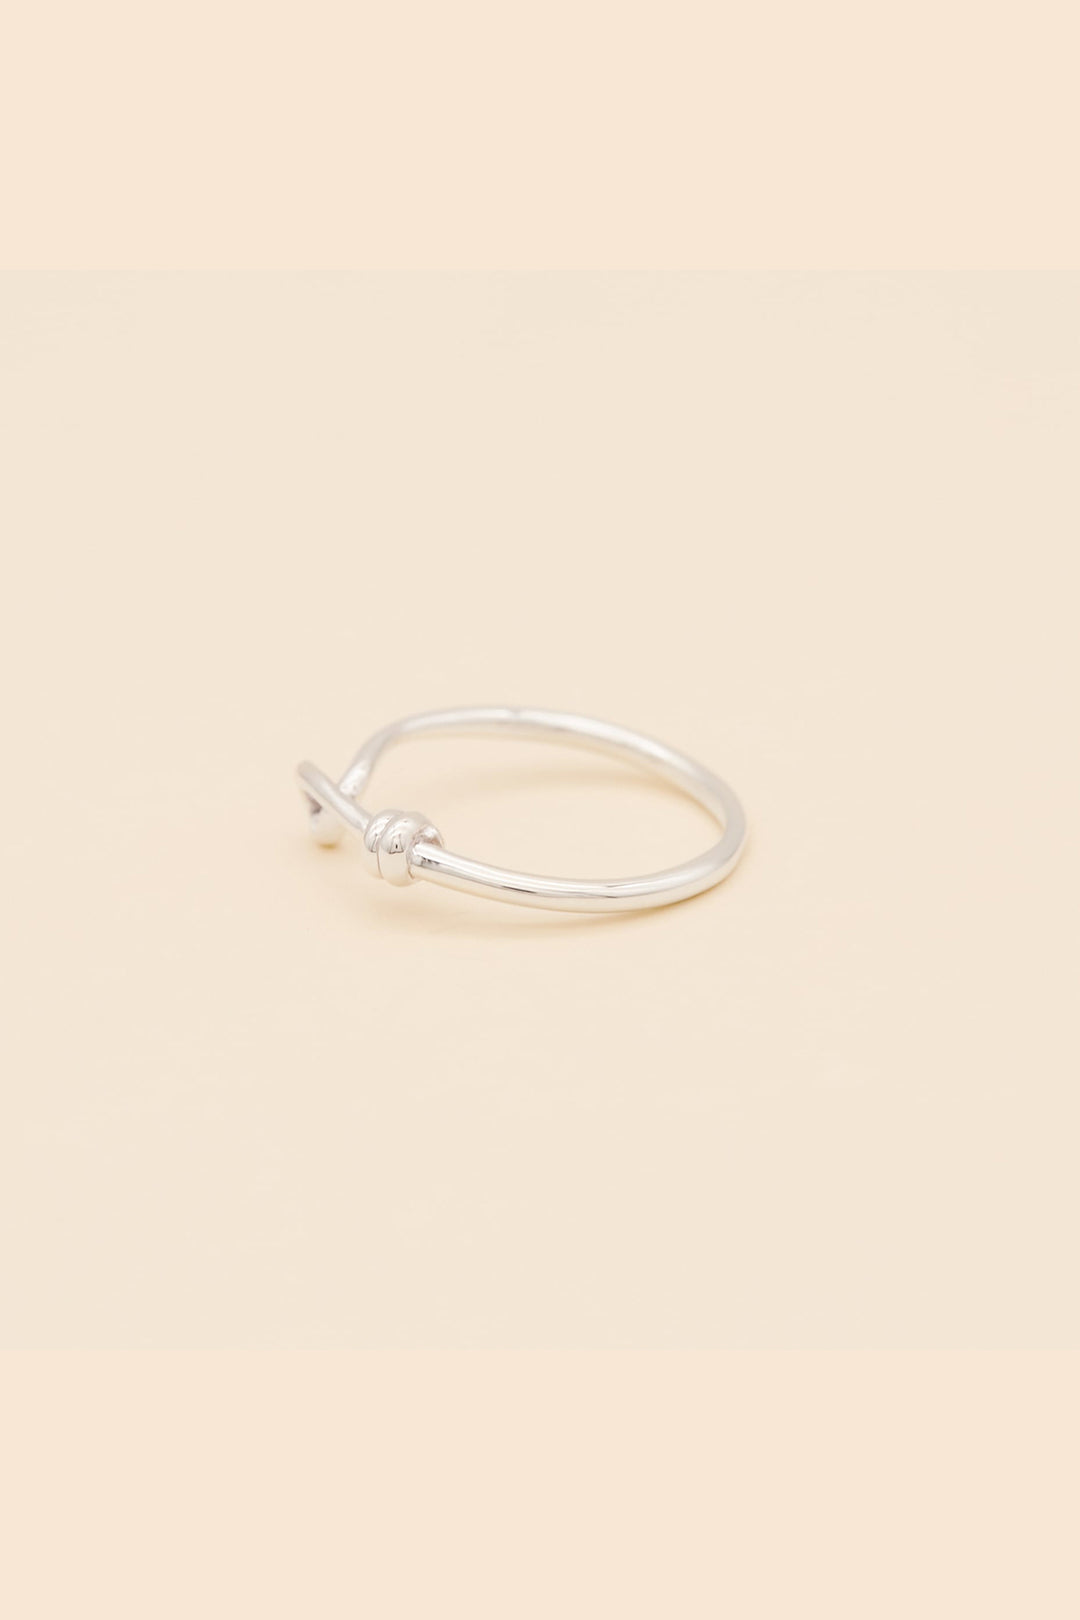 Sprout / SP-R26 / RING